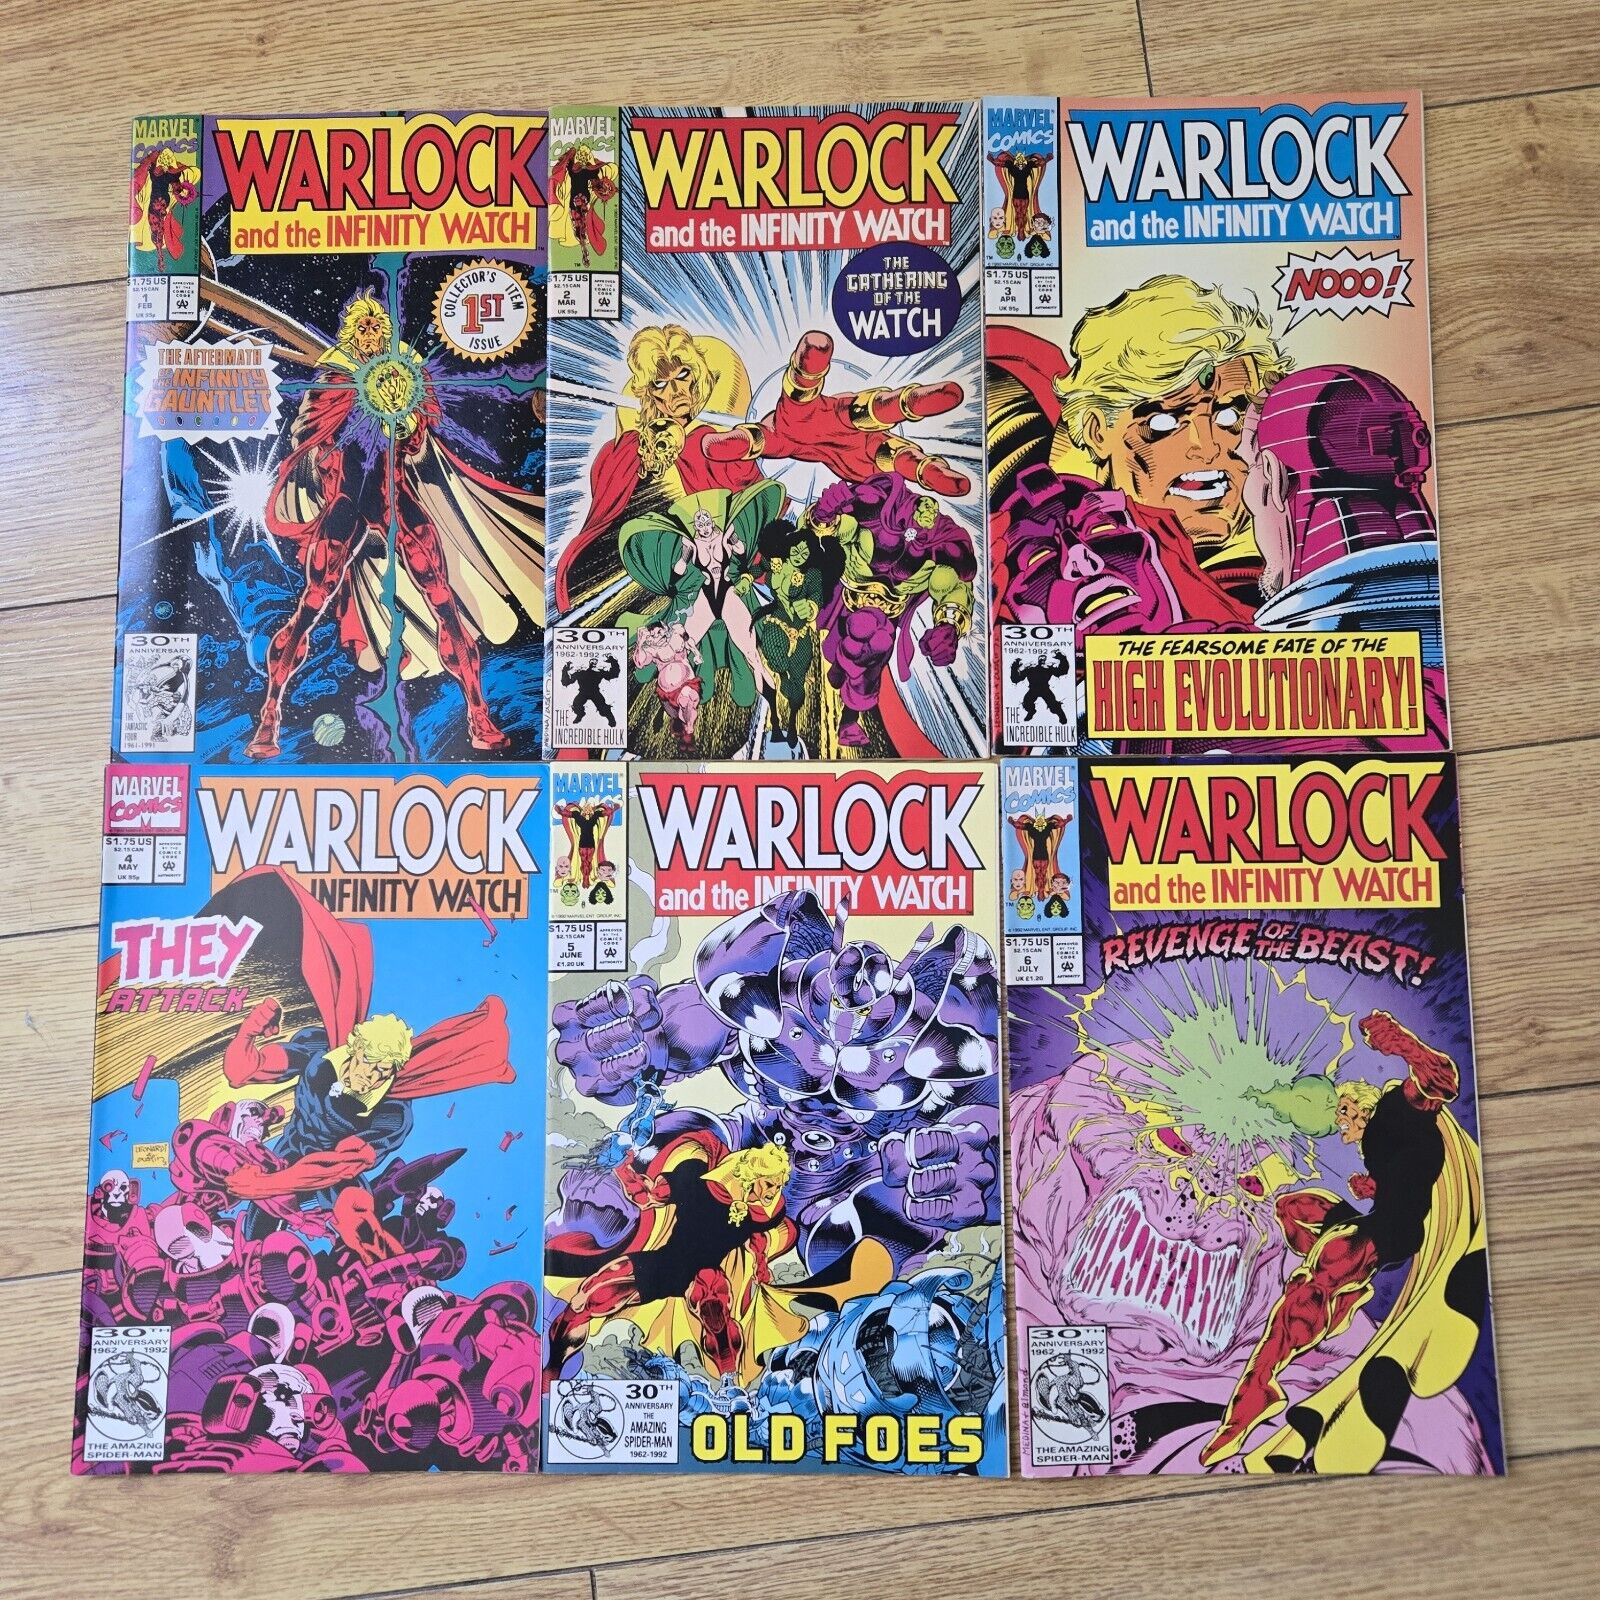 WARLOCK and the INFINITY WATCH #1-6 (MARVEL COMICS 1991) VTG Lot of 6 STARLIN